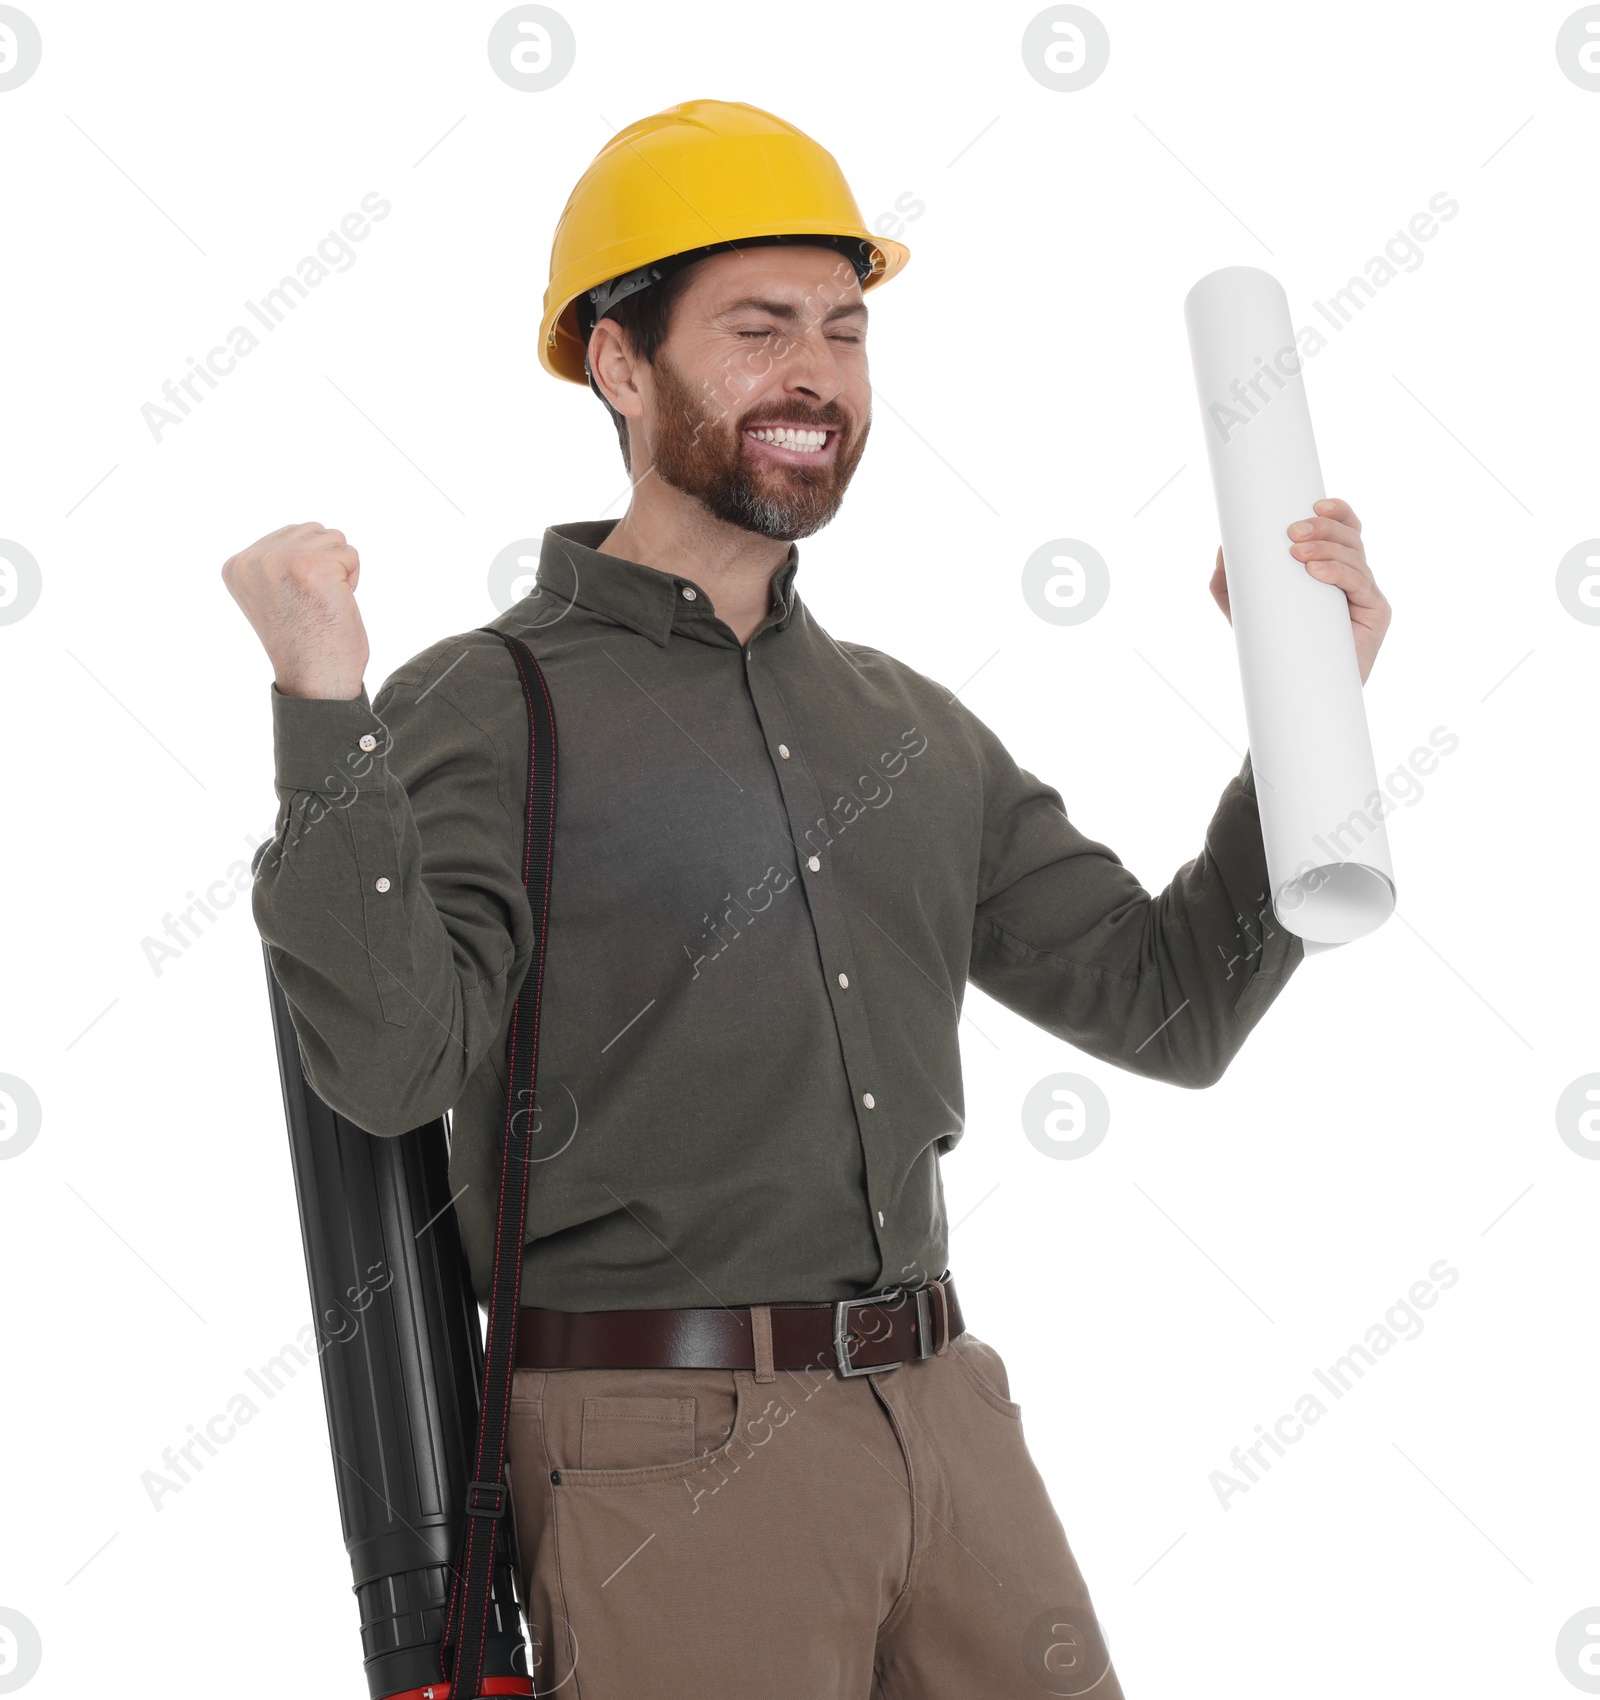 Photo of Architect in hard hat with drawing tube and draft on white background